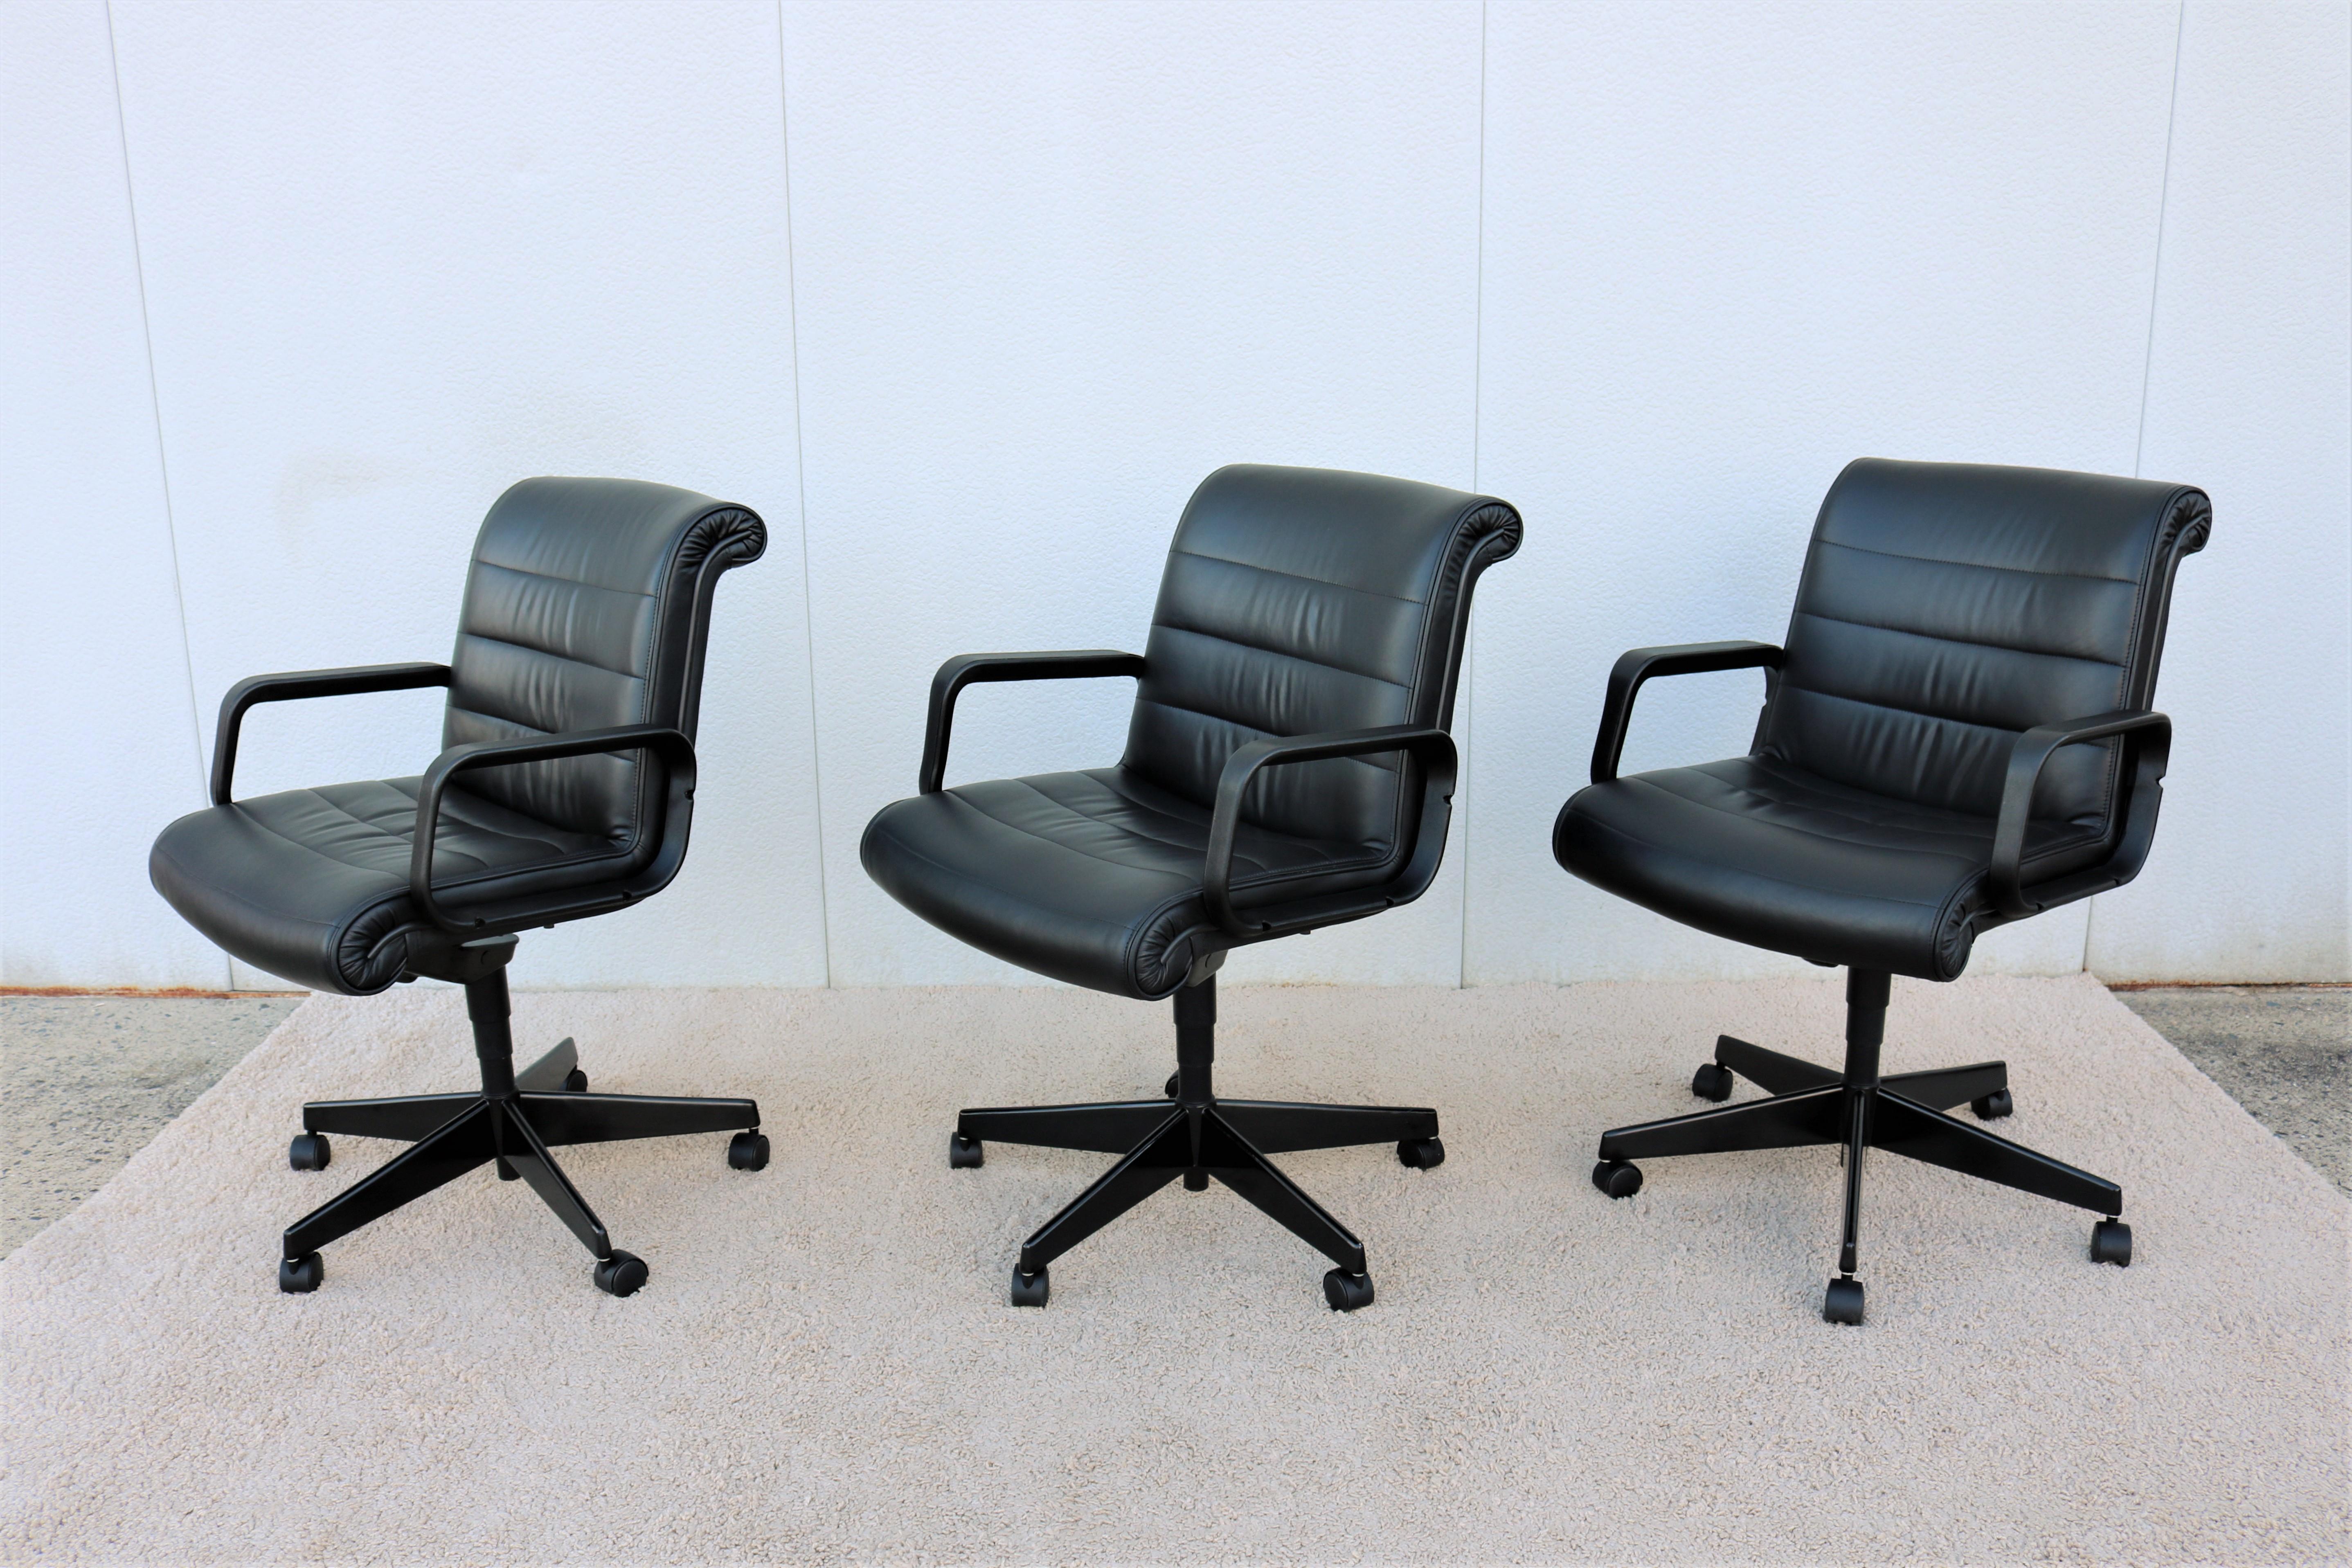 Contemporary Modern Richard Sapper for Knoll Sapper Management Ergonomic Chair In Good Condition For Sale In Secaucus, NJ